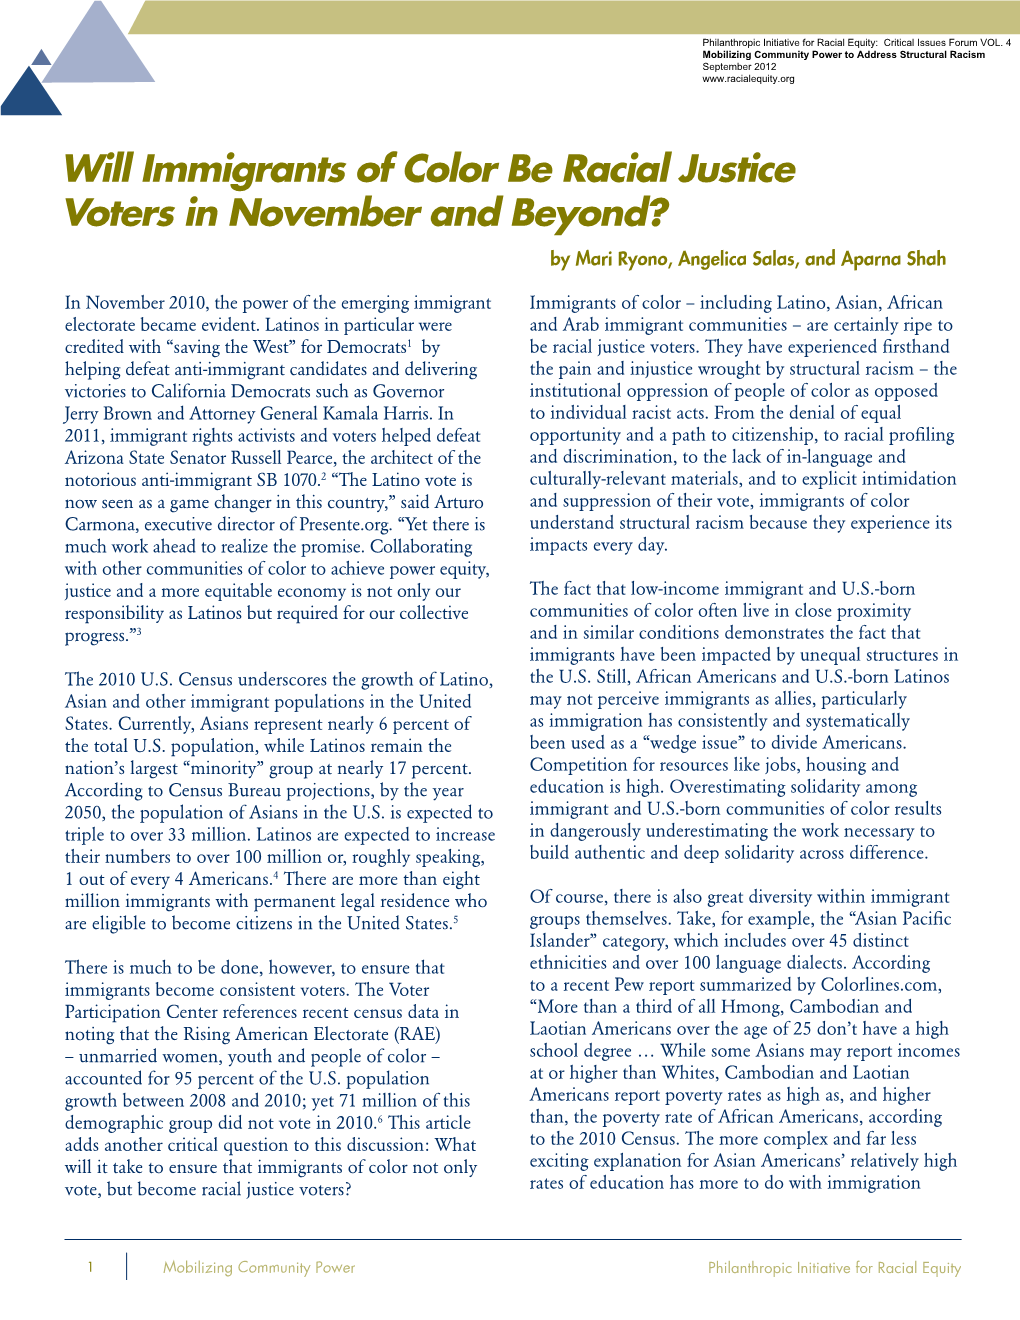 Will Immigrants of Color Be Racial Justice Voters in November and Beyond? by Mari Ryono, Angelica Salas, and Aparna Shah